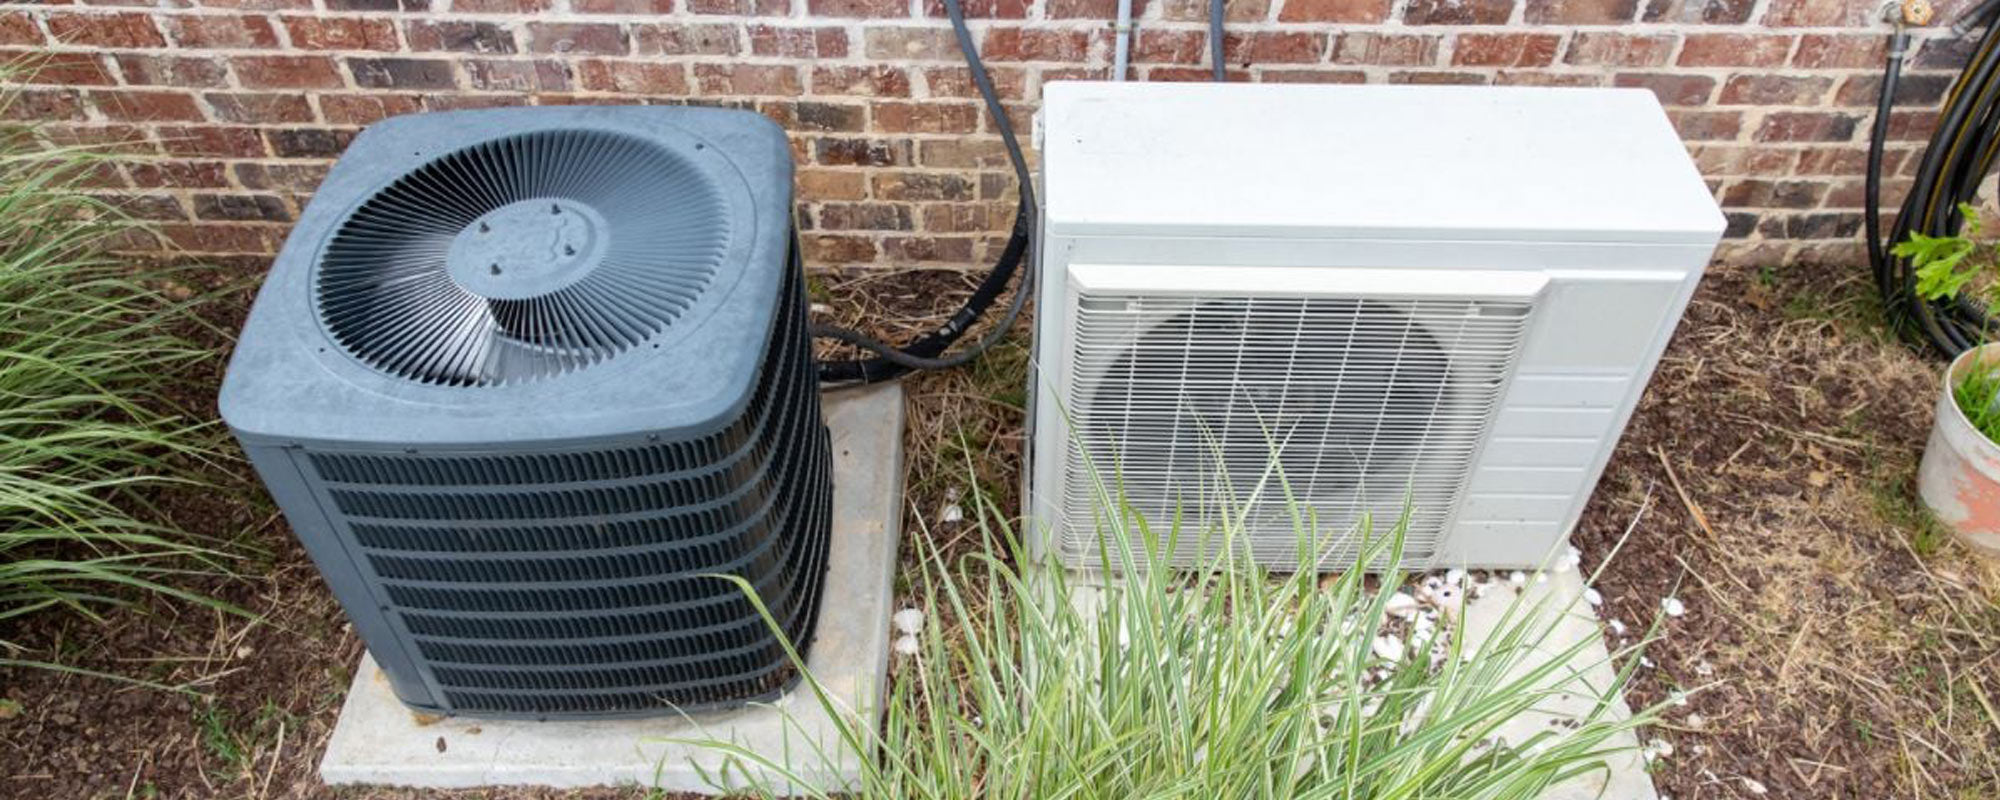 Ducted Heat Pump vs Mini Split System: Which is better for your home?